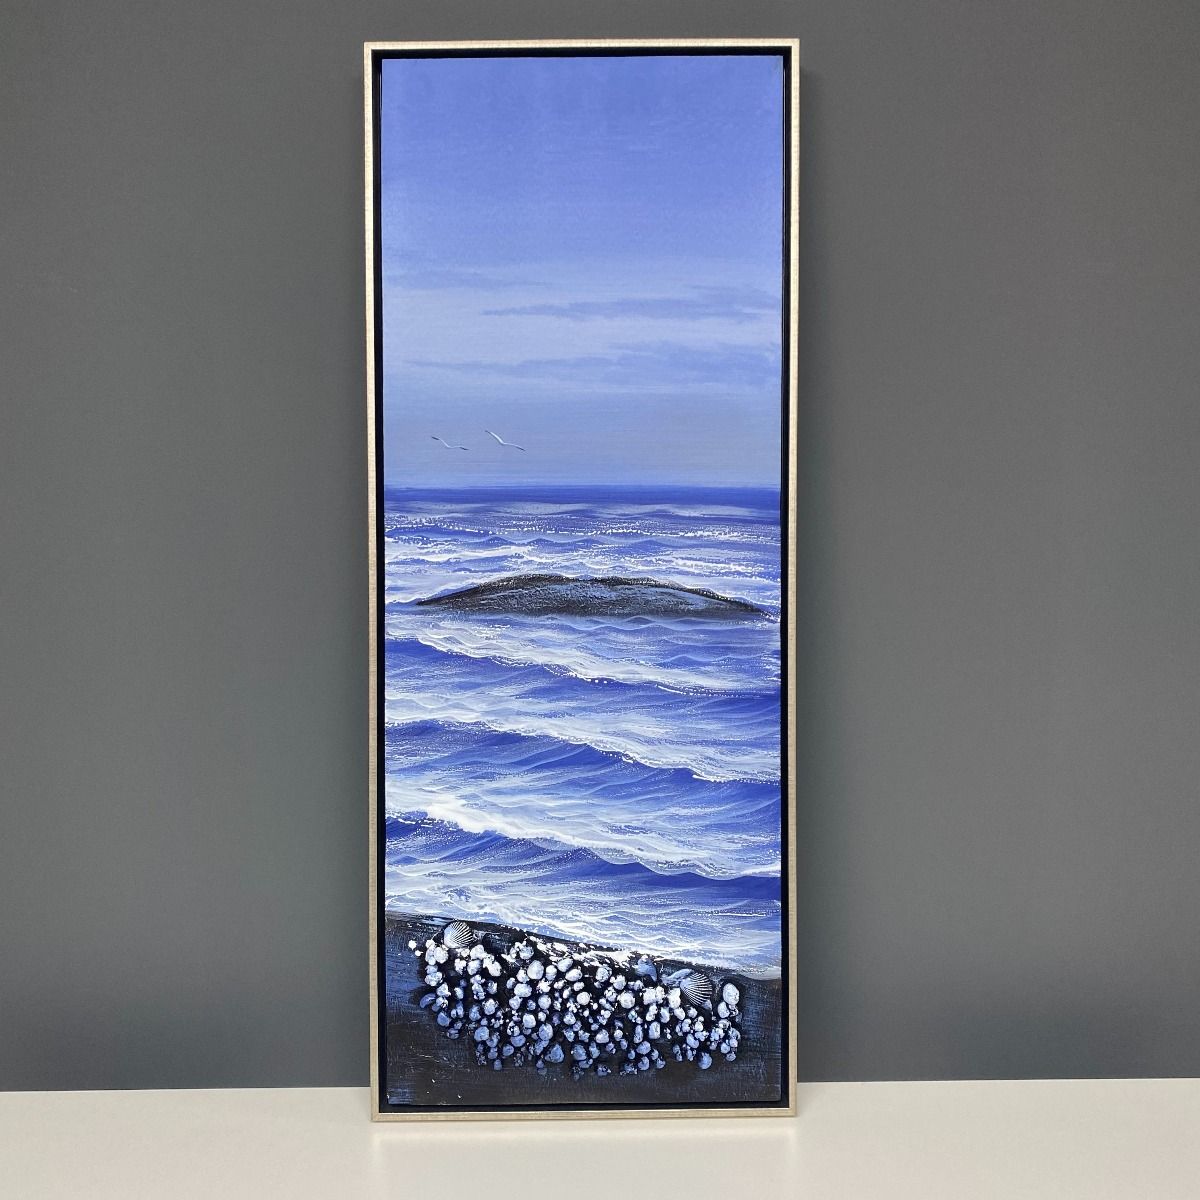 Bold and beautiful floral canvas print frame with brushed silver.

Hand Painted Canvas Print
Height: 100cm
Width: 40cm
Depth: 5.5cm
Frame Colour: Brushed Silver
Hanging Position: Portrait

Perfect for updating your home, this elegant, sky blue seaside canvas is hand-painted and finished beautifully with a brushed silver frame. Add a pop of colour into any interior with this stunning piece. Perfect for living rooms and bedrooms seeking colour and class! Amazing on it's own or ideal as a set with the rest of the Beach Shells range